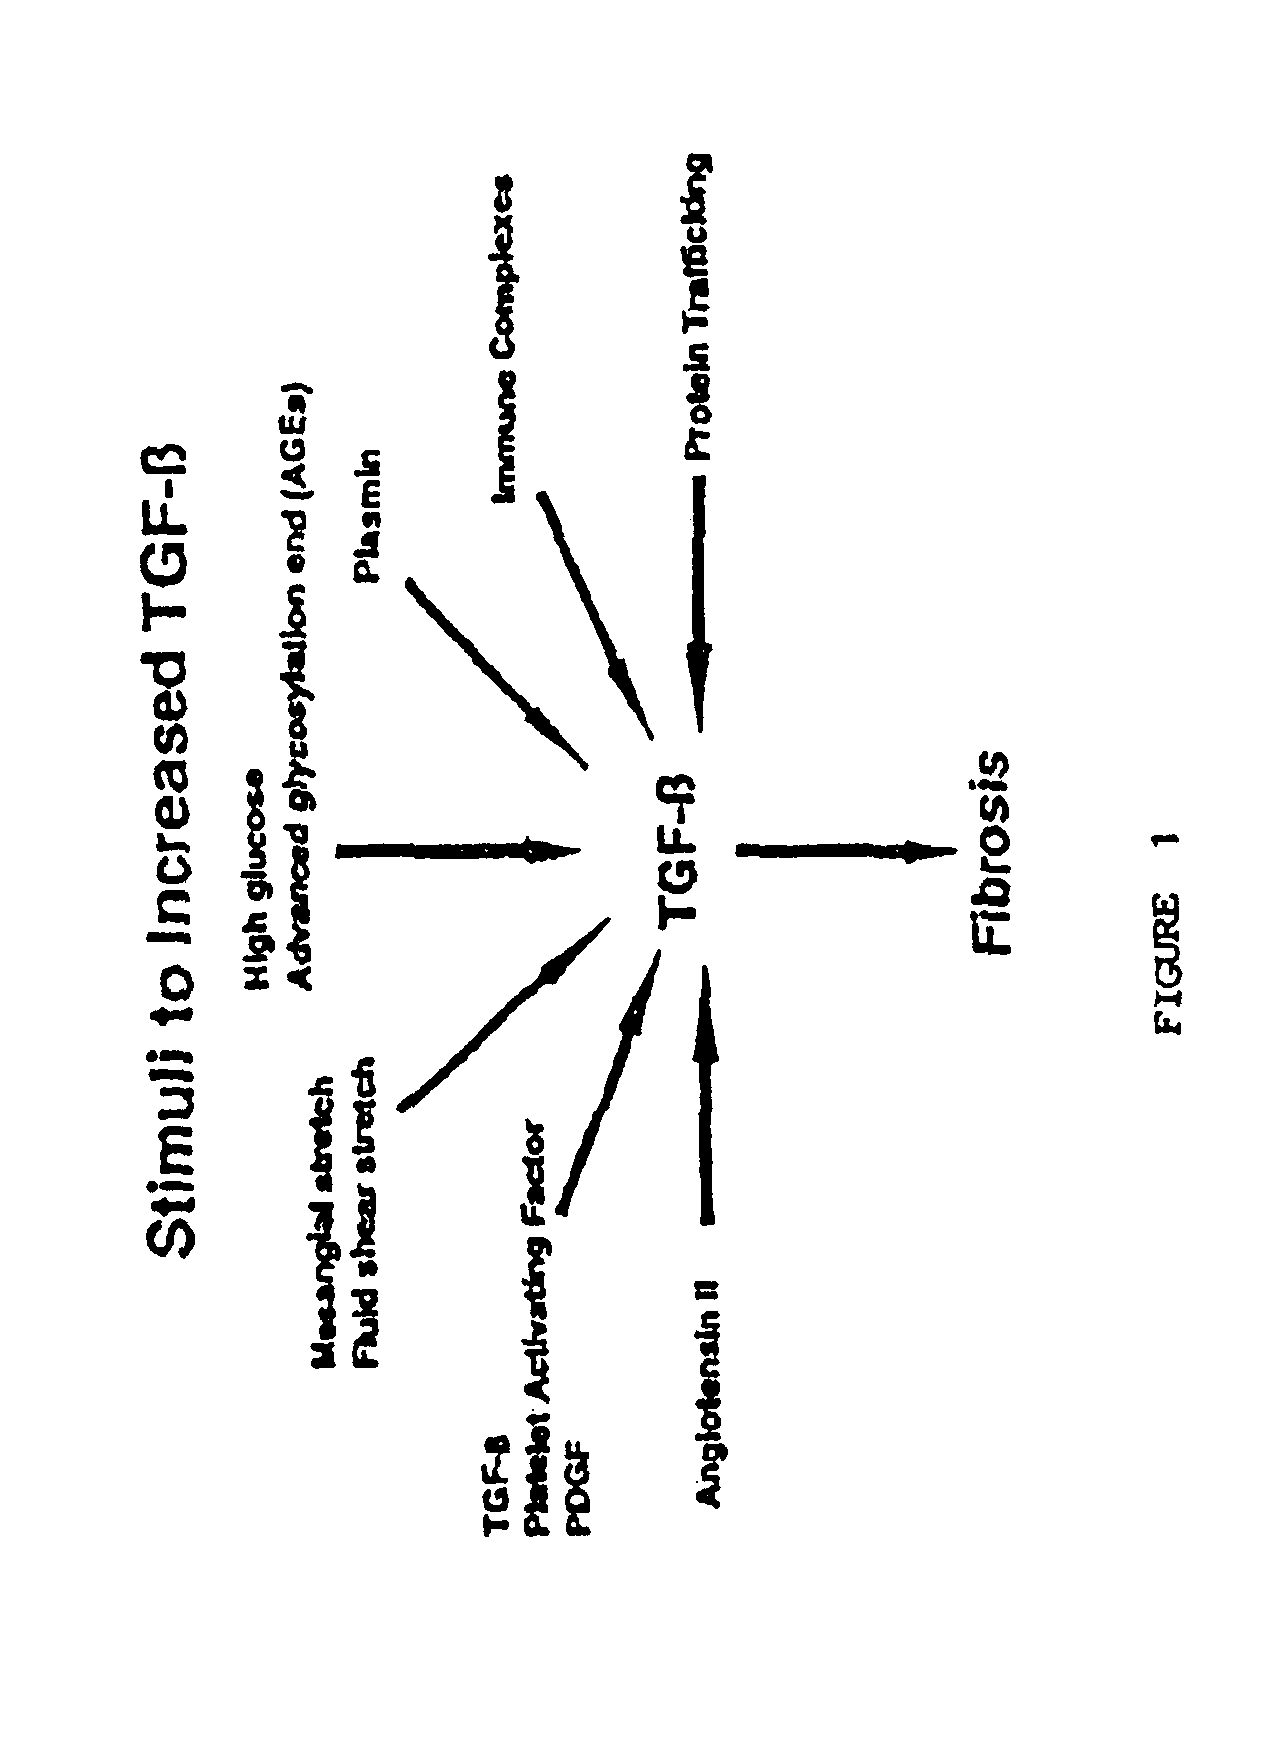 Methods for treating conditions associated with the accumulation of excess extracellular matrix